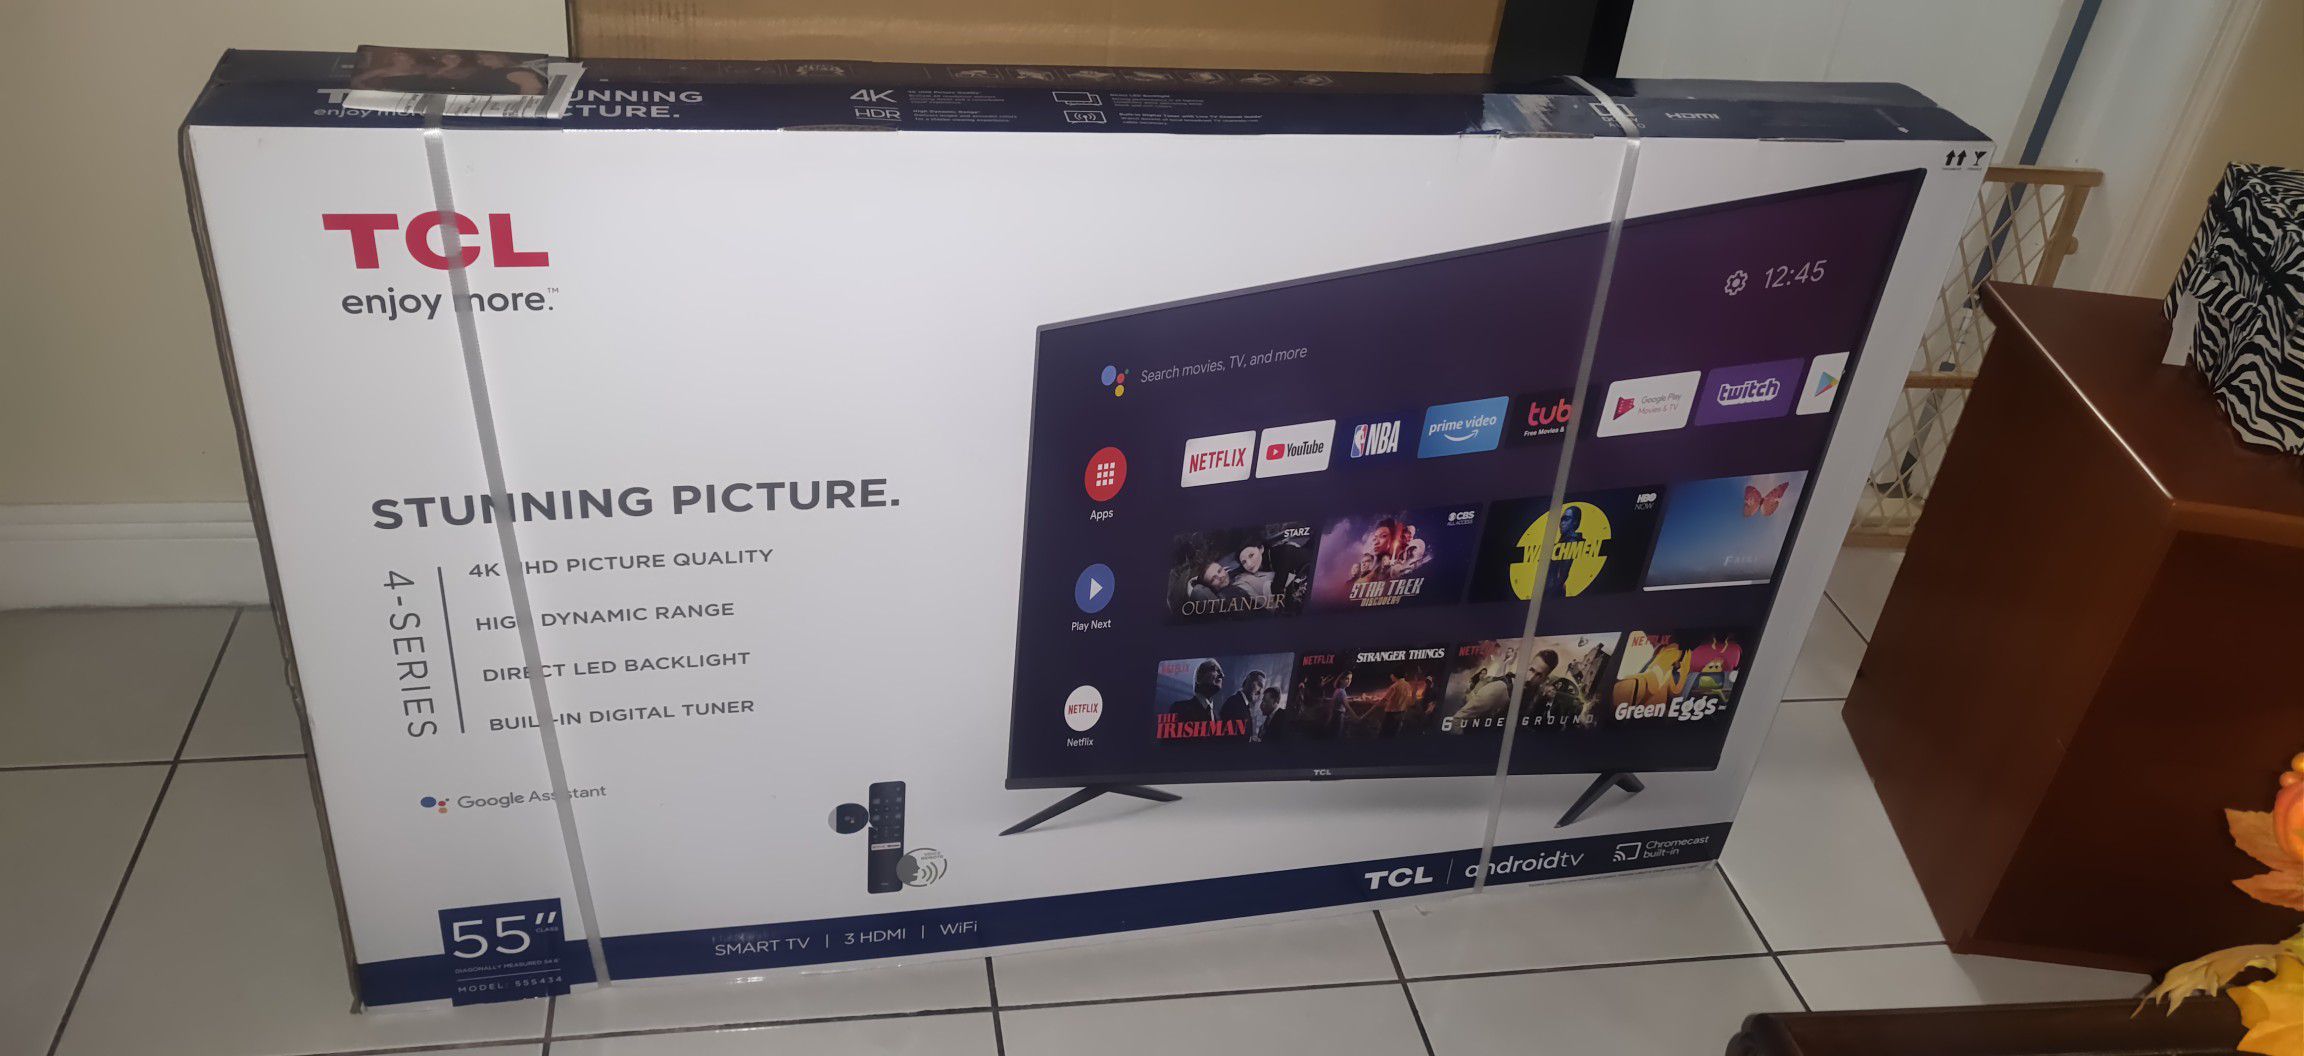 Brand new TCL 55" LED TV 4K Android TV Google Sealed Special